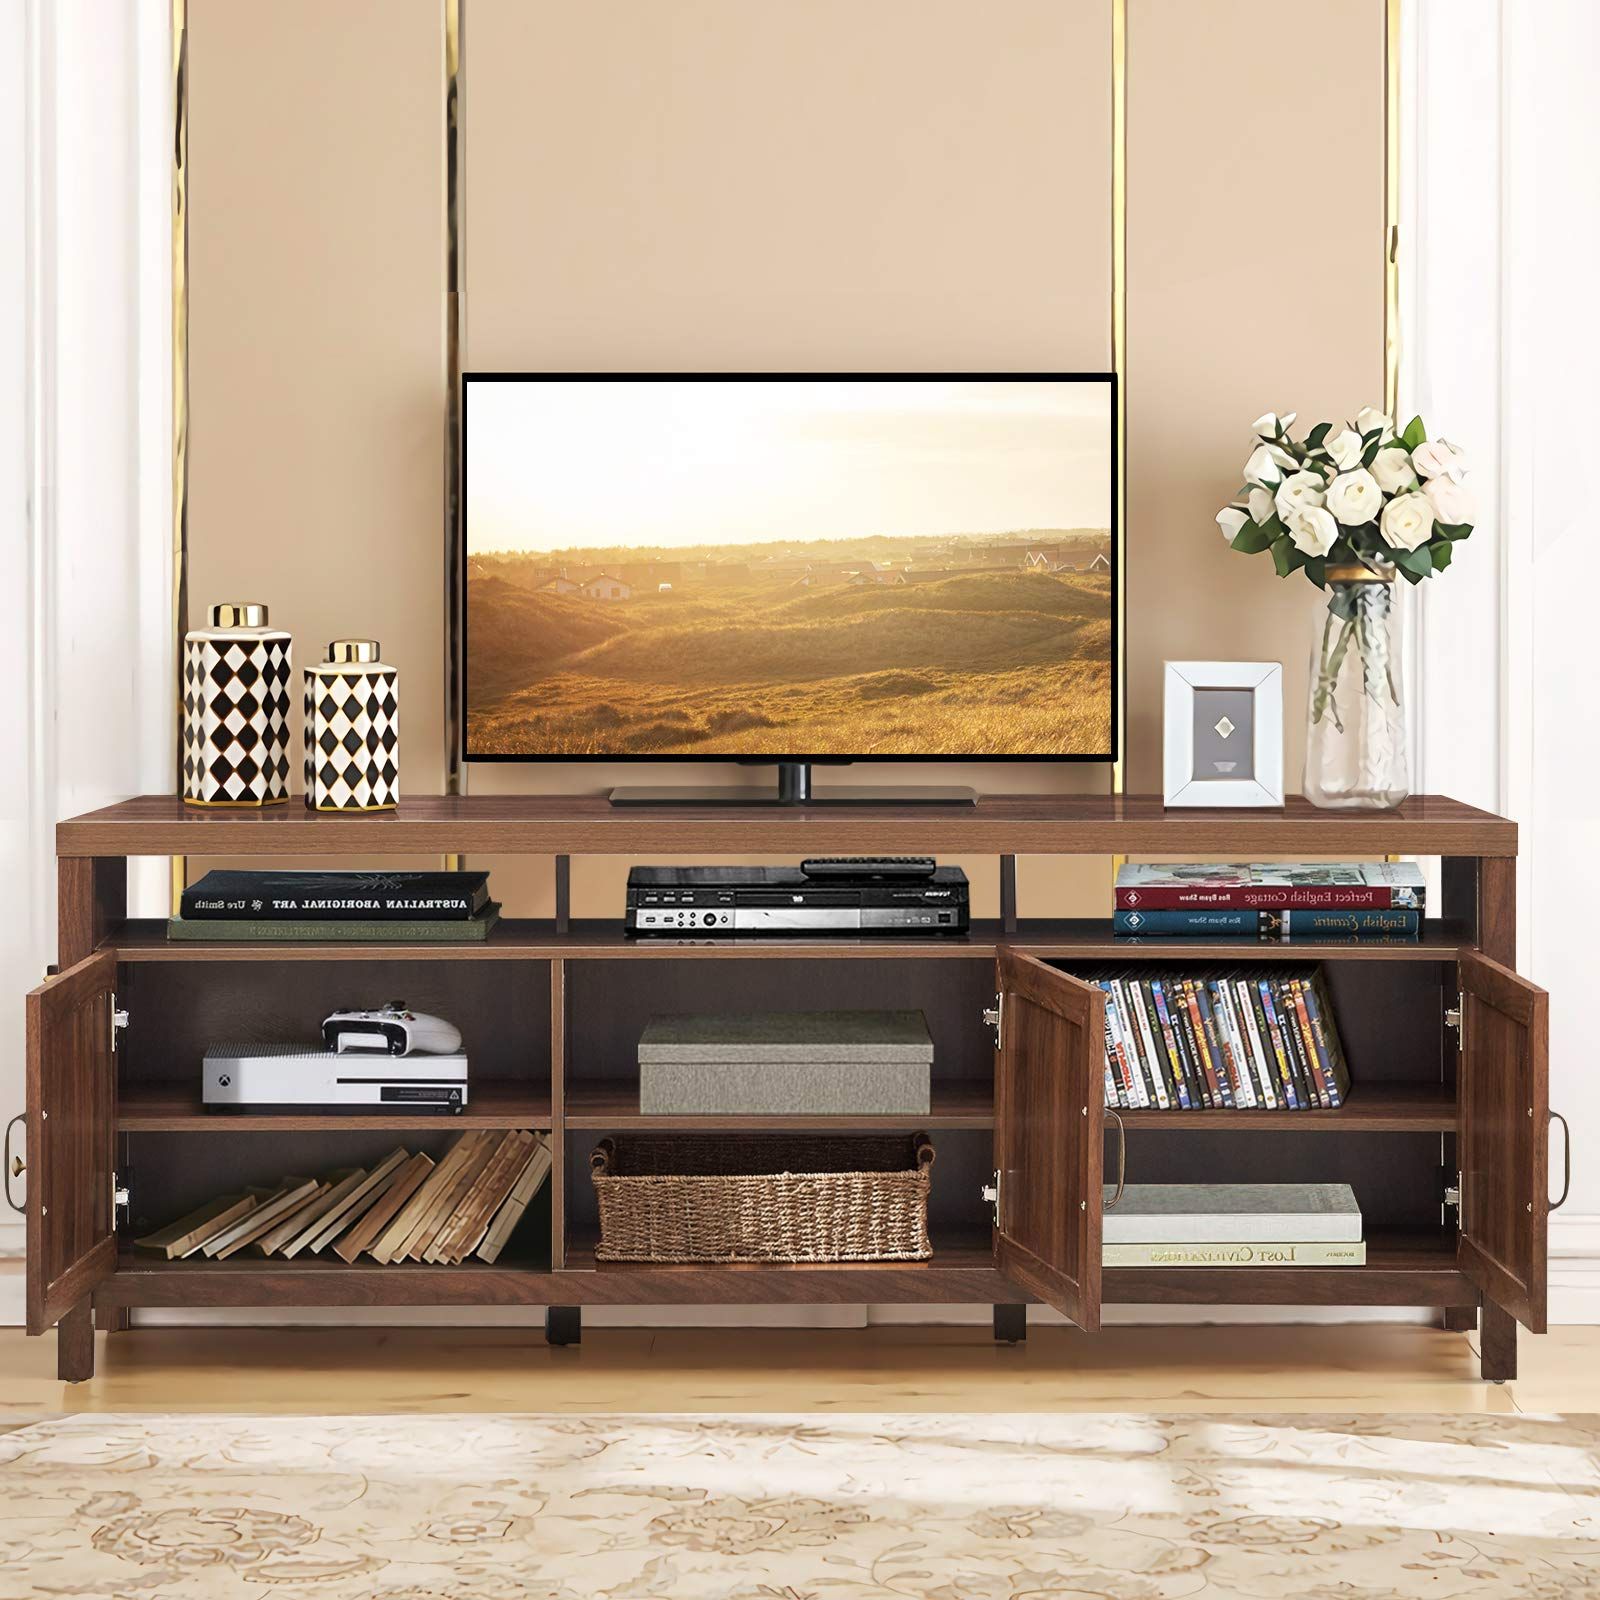 Tangkula Rattan Tv Stand For Tvs Up To 65 Inches, Farmhouse Boho Wood In Fashionable Farmhouse Rattan Tv Stands (View 5 of 15)